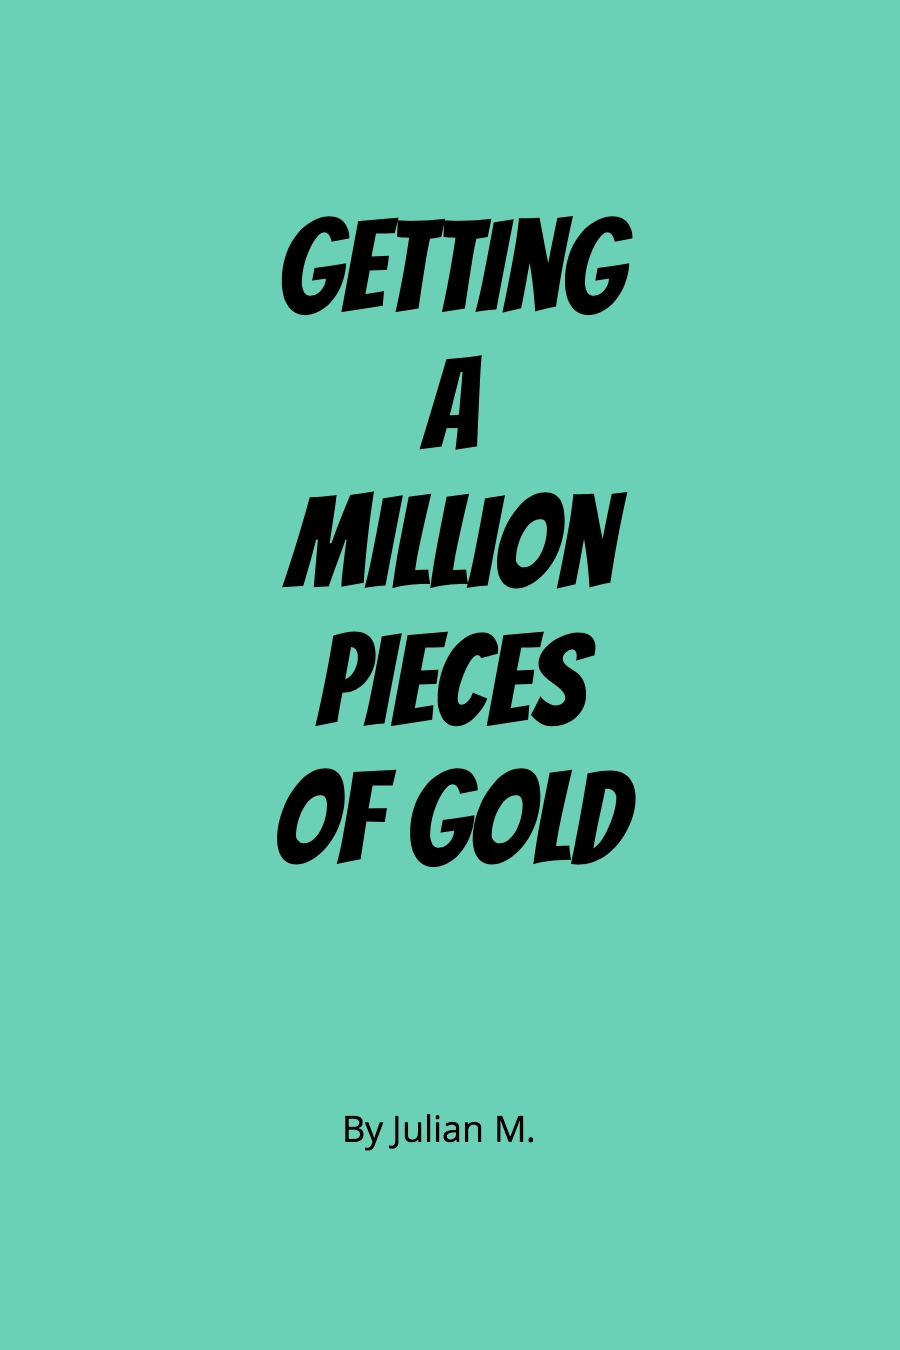 Getting a Million Pieces of Gold by Julian M